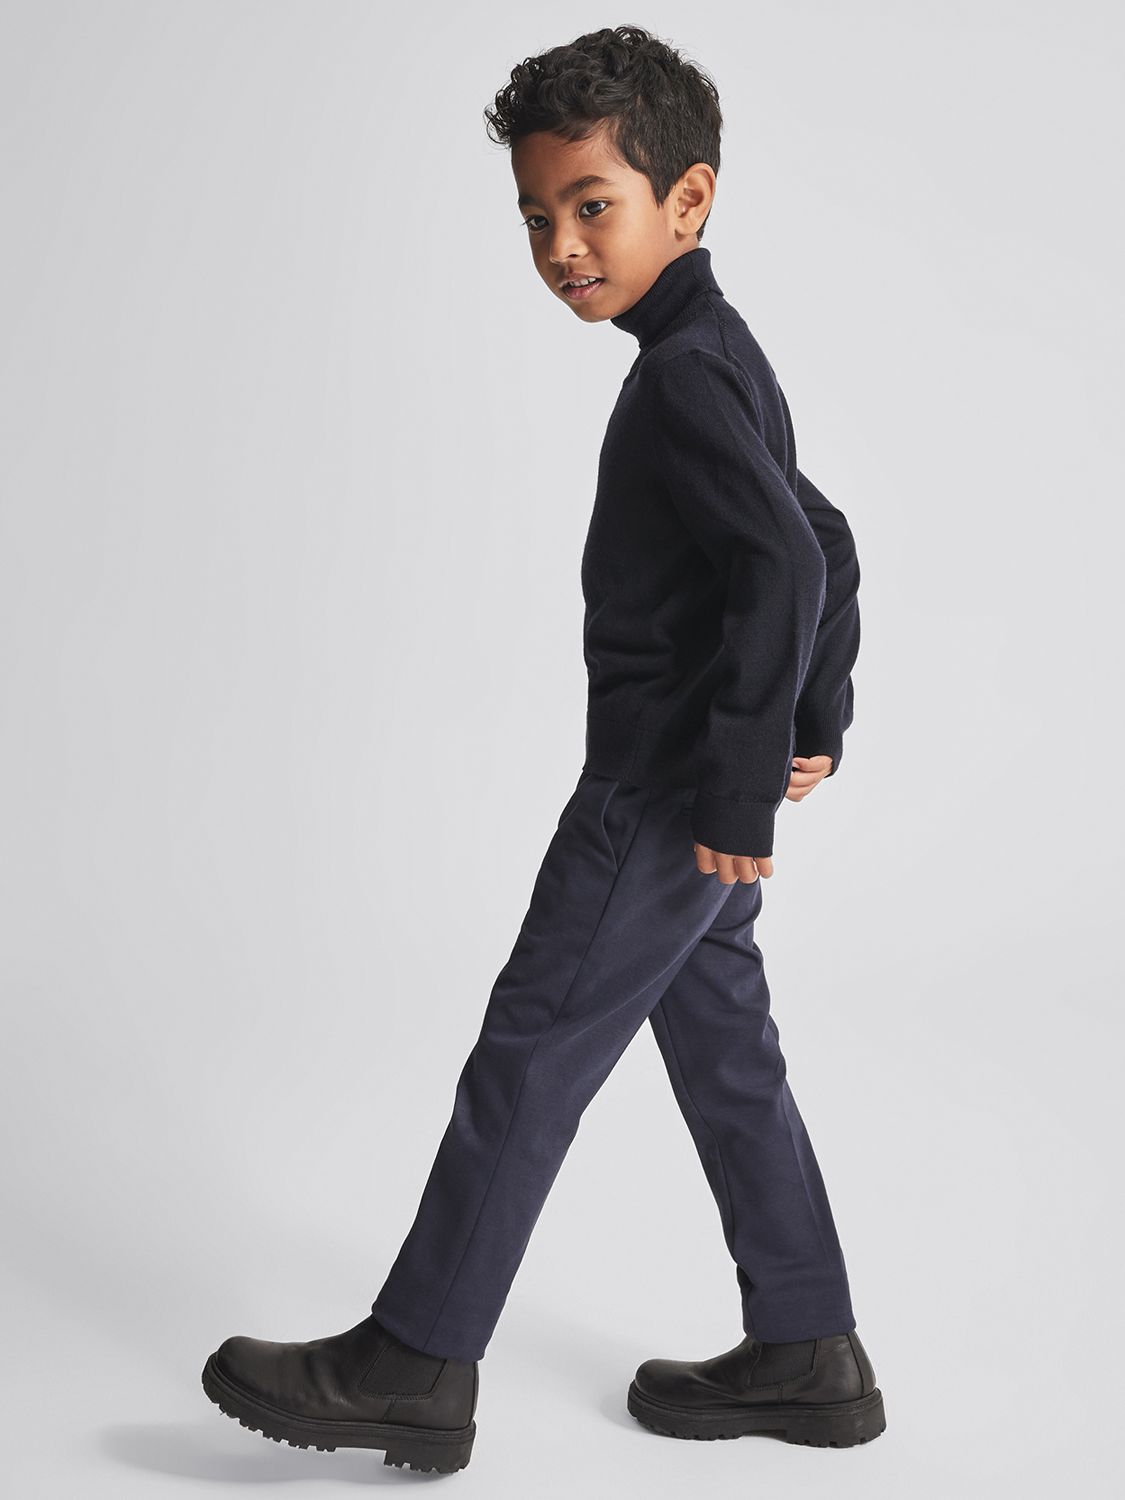 Buy Reiss Kids' Eastbury Stretch Chino Trousers Online at johnlewis.com